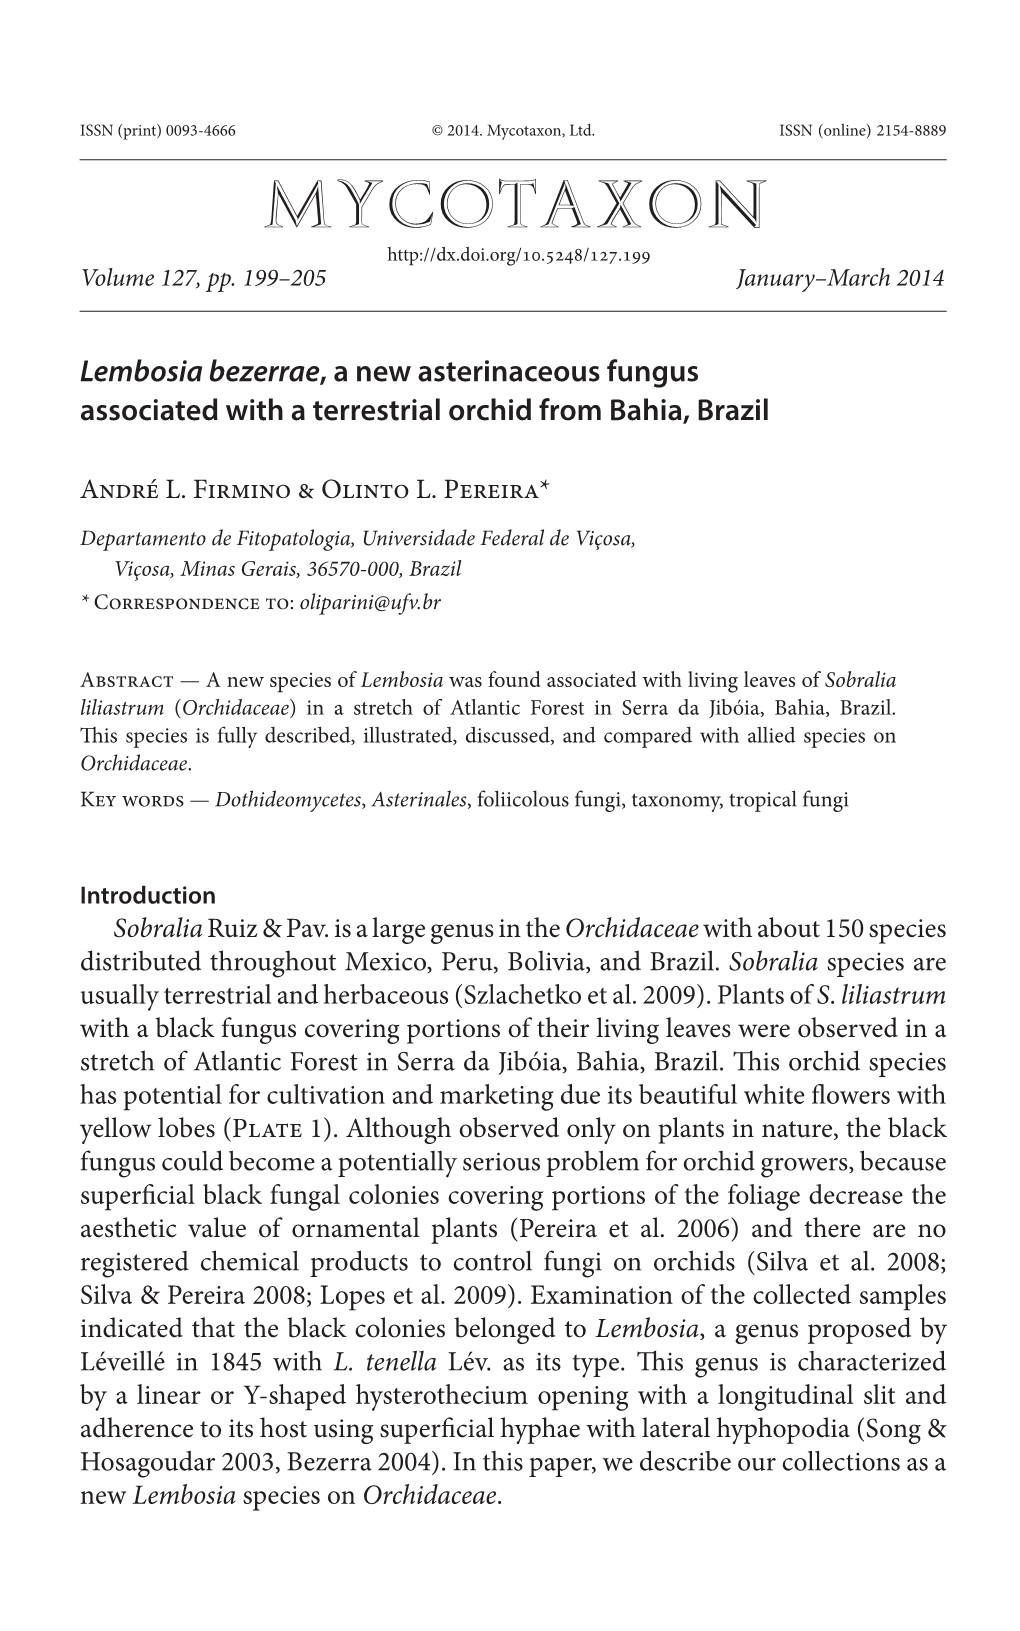 &lt;I&gt;Lembosia Bezerrae&lt;/I&gt;, a New Asterinaceous Fungus Associated with a Terrestrial Orchid from Bahia, Brazil